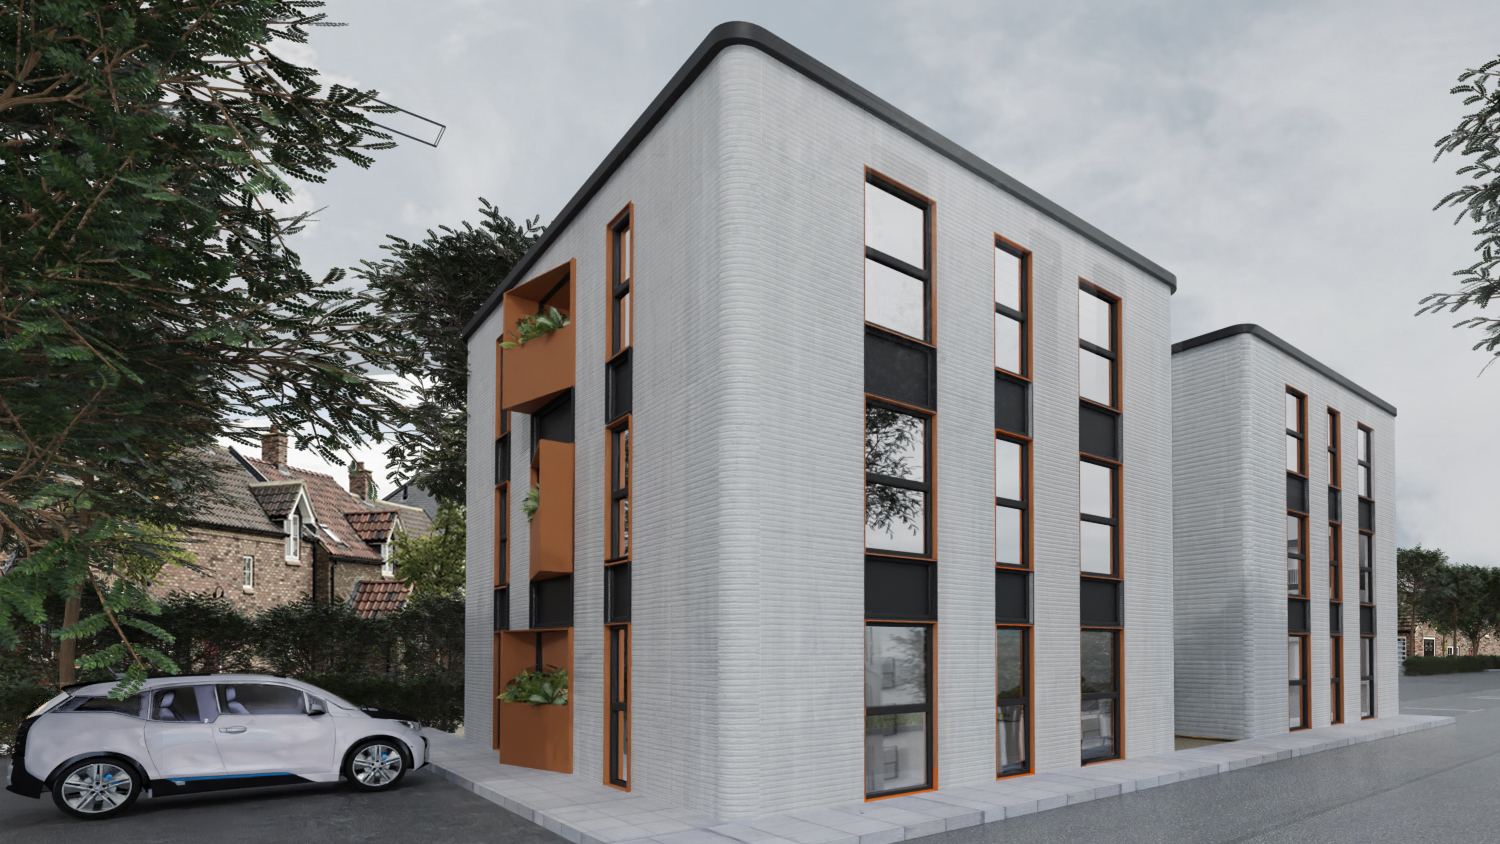 3D printed homes image: a design from Harcourt Architects